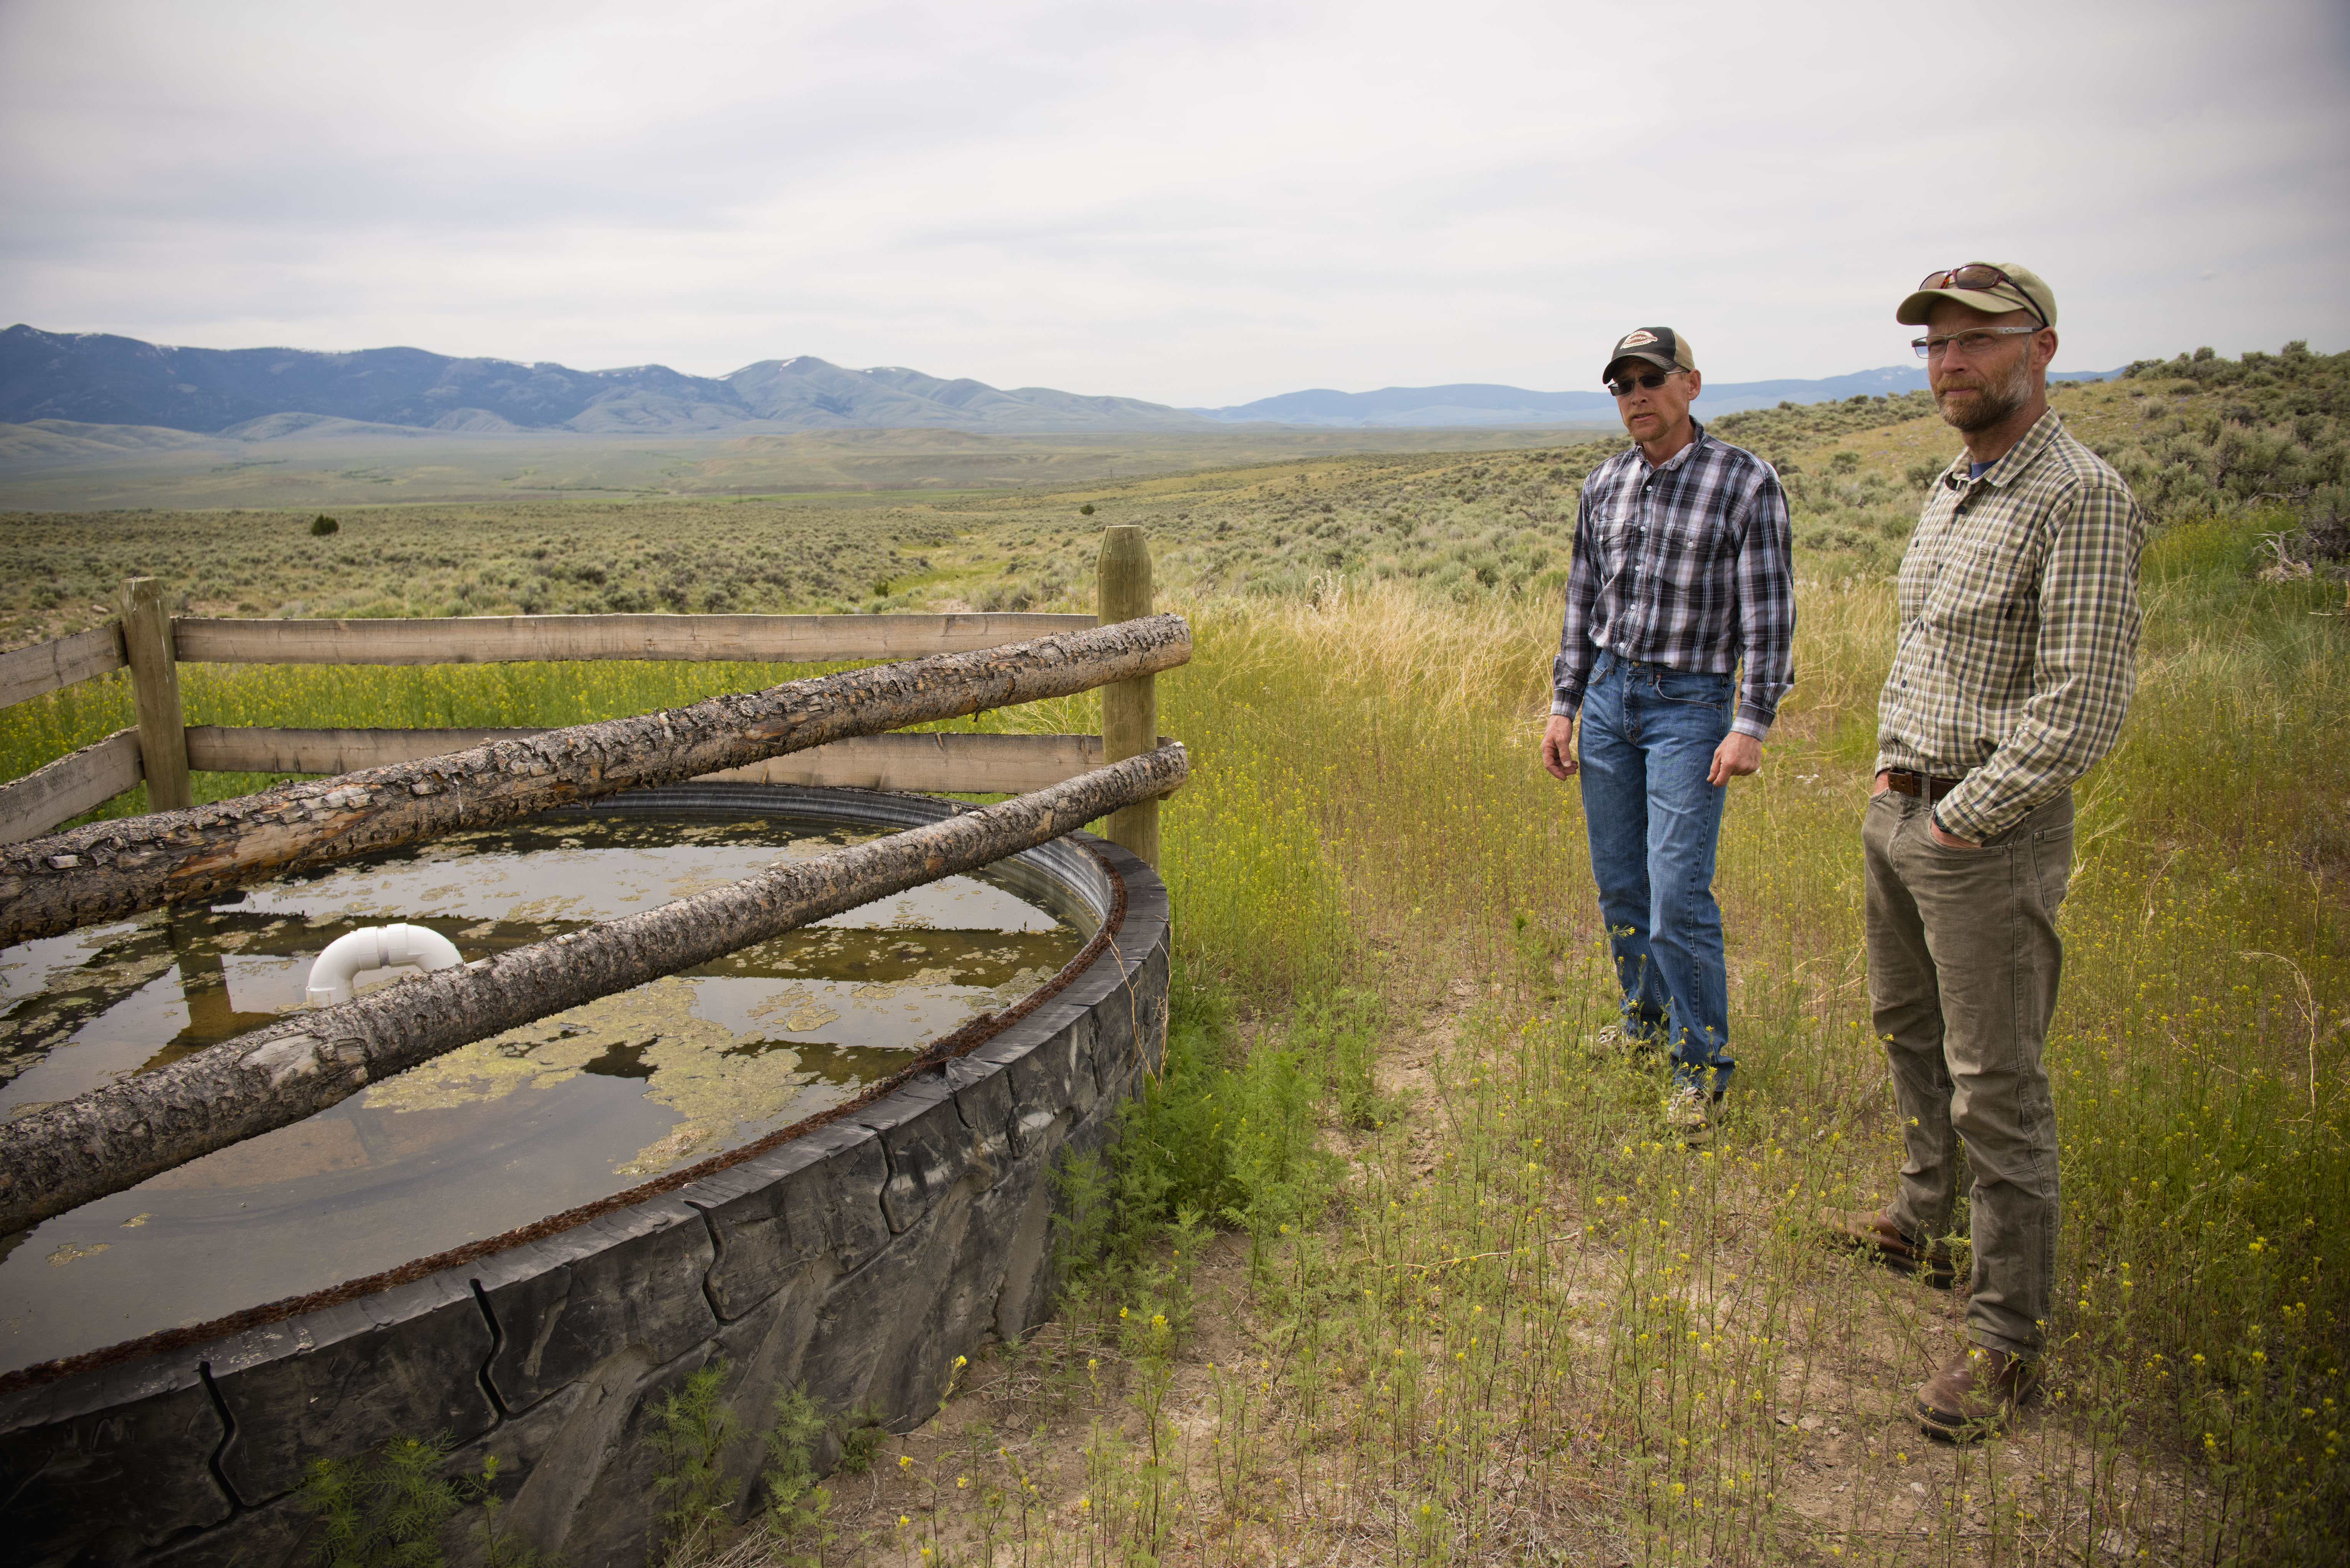 Eric Hansen worked with Jim Berkey of The Nature Conservancy to place an easement on his working ranch in Montana.